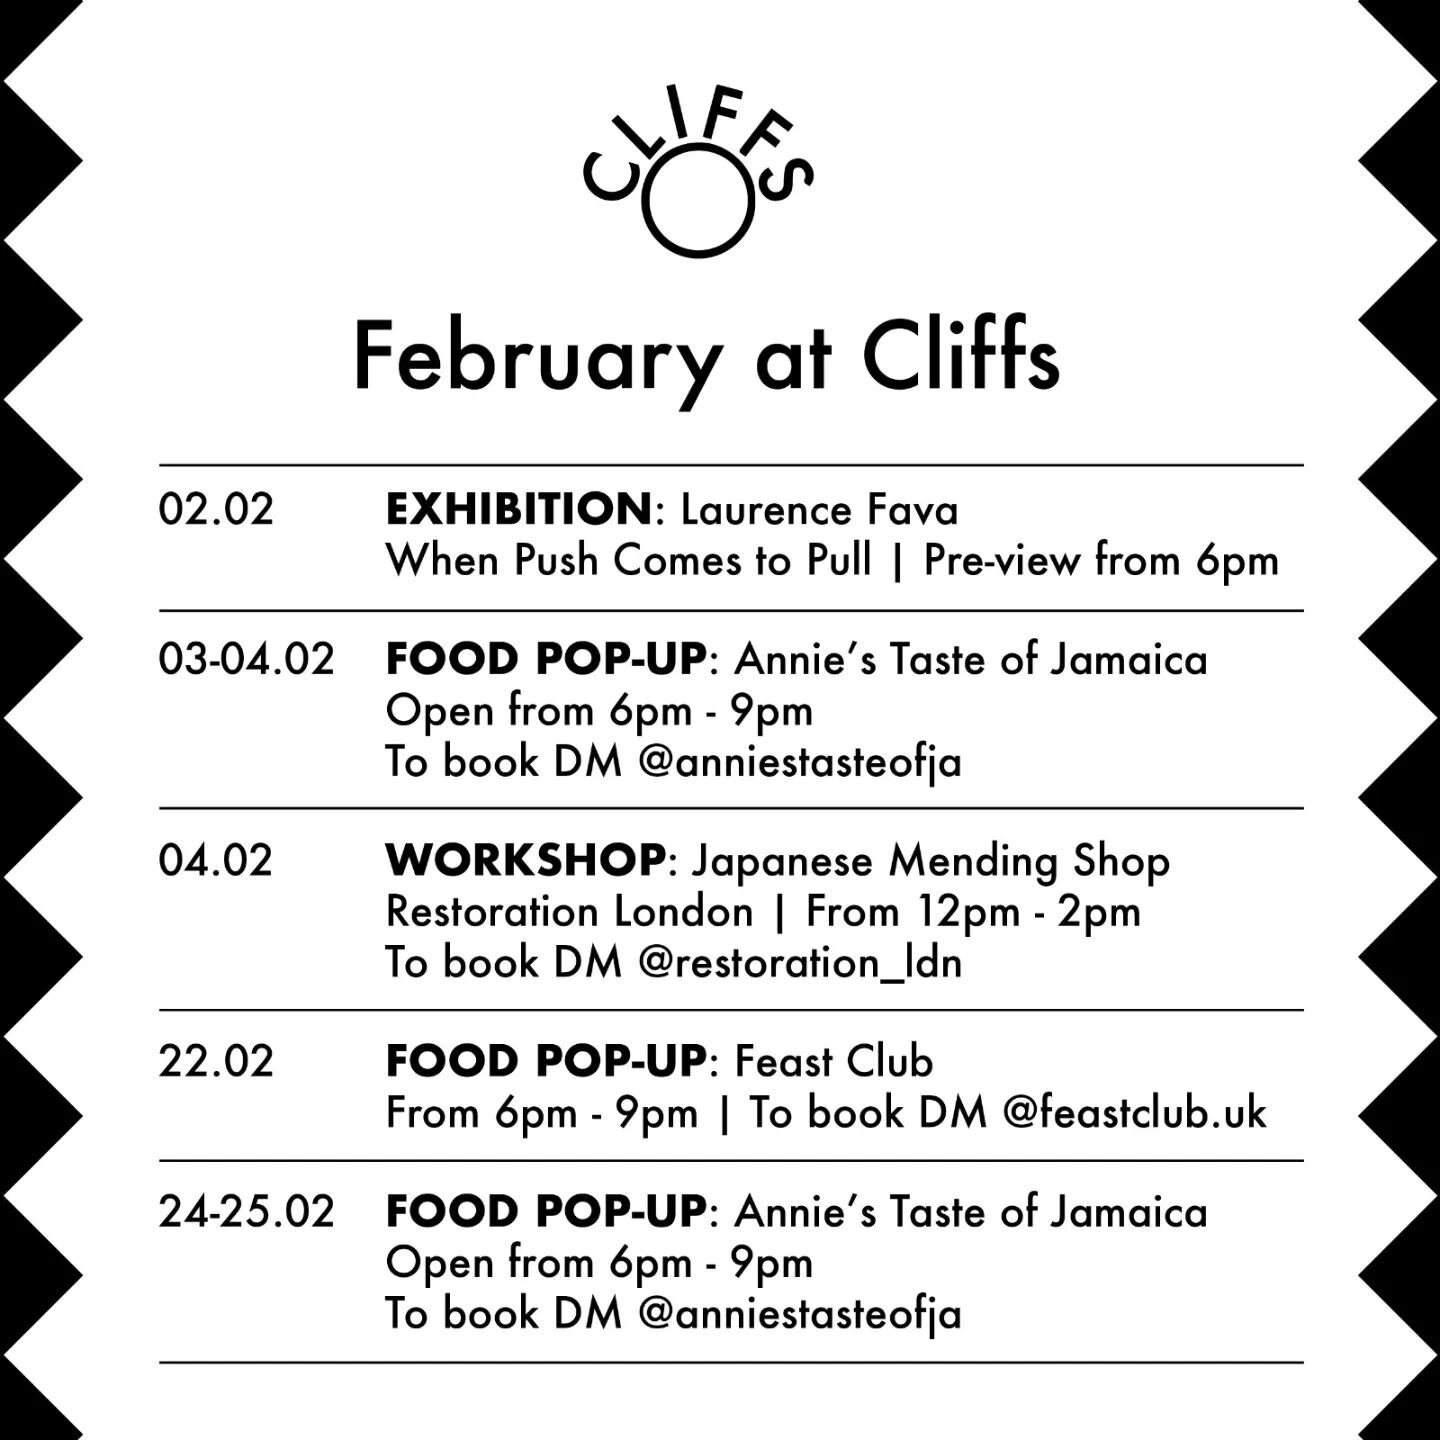 We have a busy, busy month with lots of pop-up dates, exhibitions and workshops, that even we were struggling to keep up!

So here's a little time table so you don't miss out on all the fun bits! 

***WORKSPACE PEEPS****
Please be aware on Sunday 4th